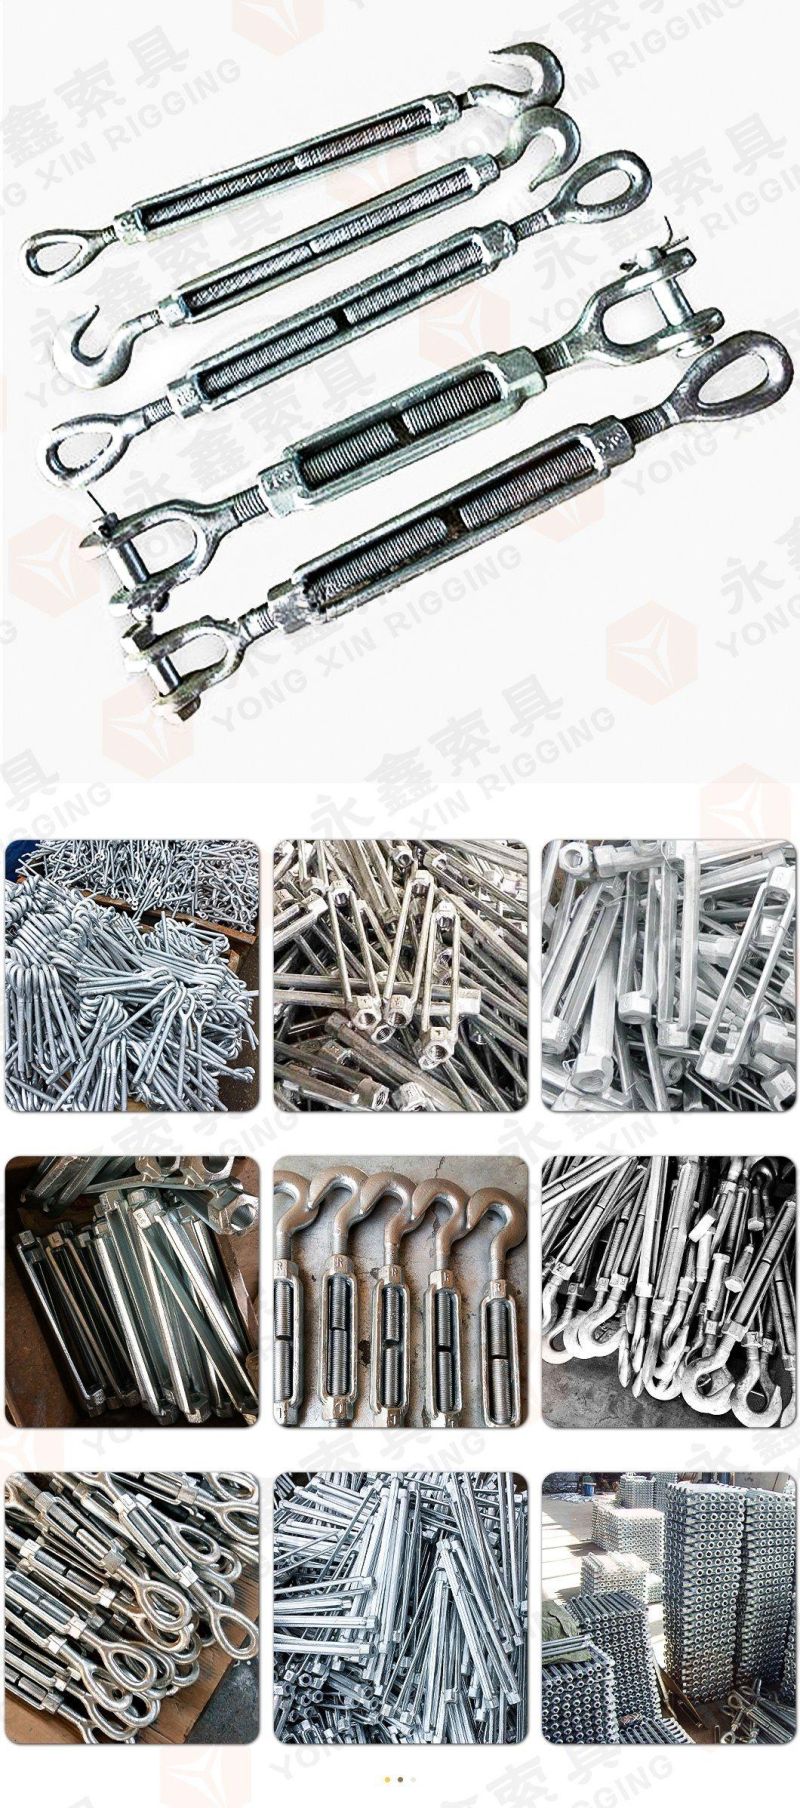 Stainless Steel Turnbuckle M6 M8